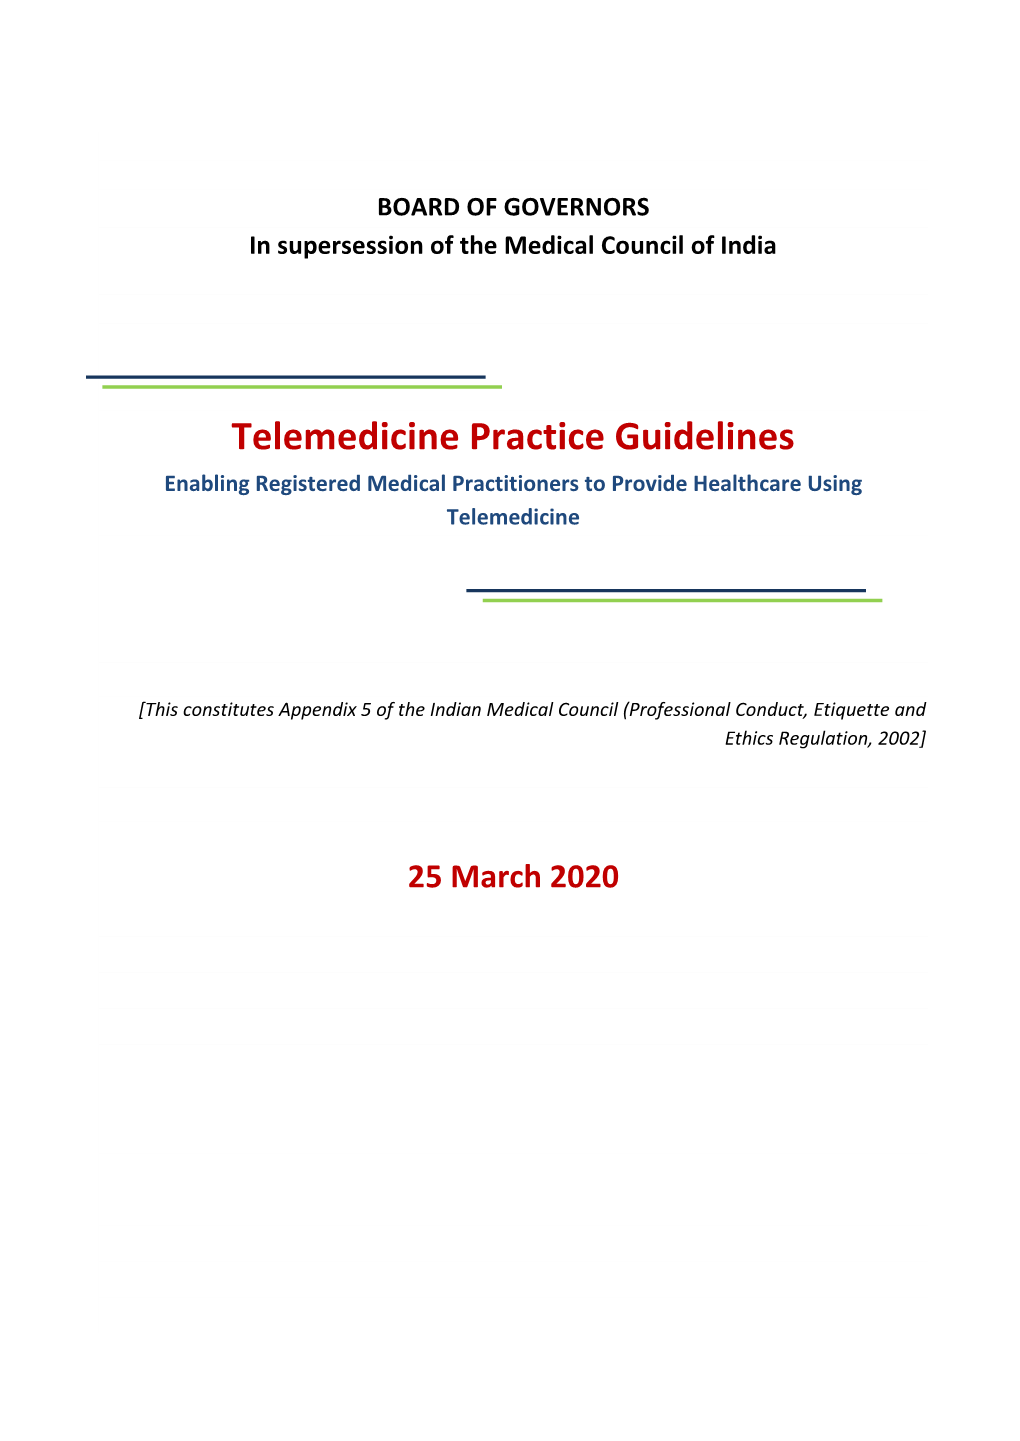 Telemedicine Practice Guidelines Enabling Registered Medical Practitioners to Provide Healthcare Using Telemedicine